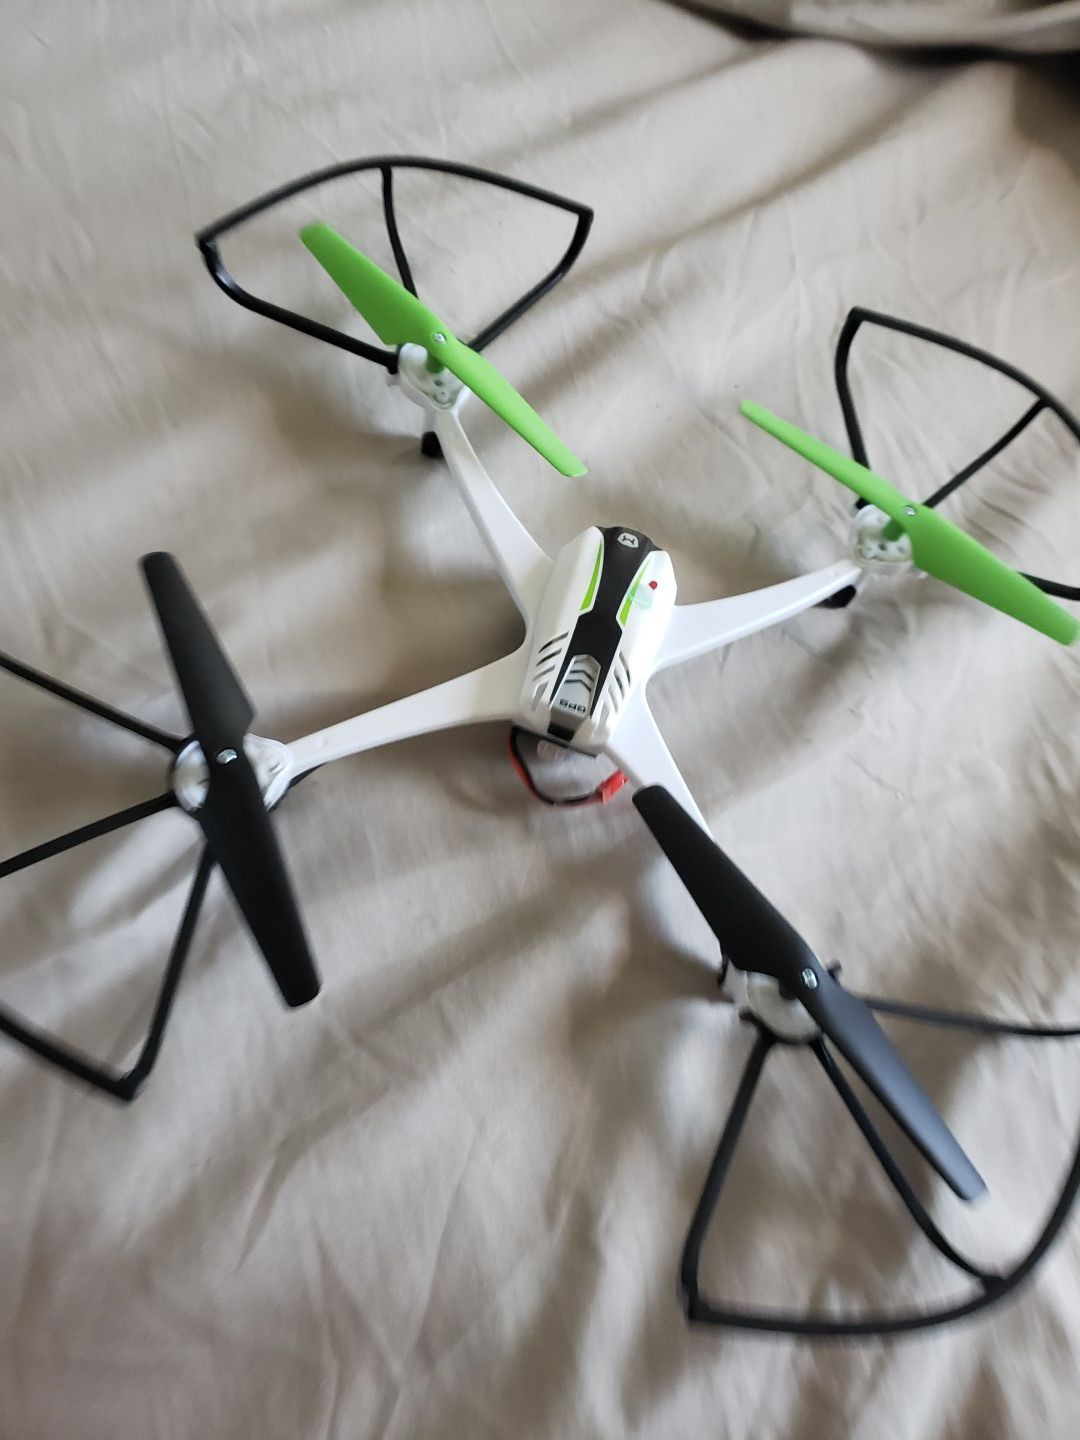 Green white Quadcopter gps Drone ups for grabs